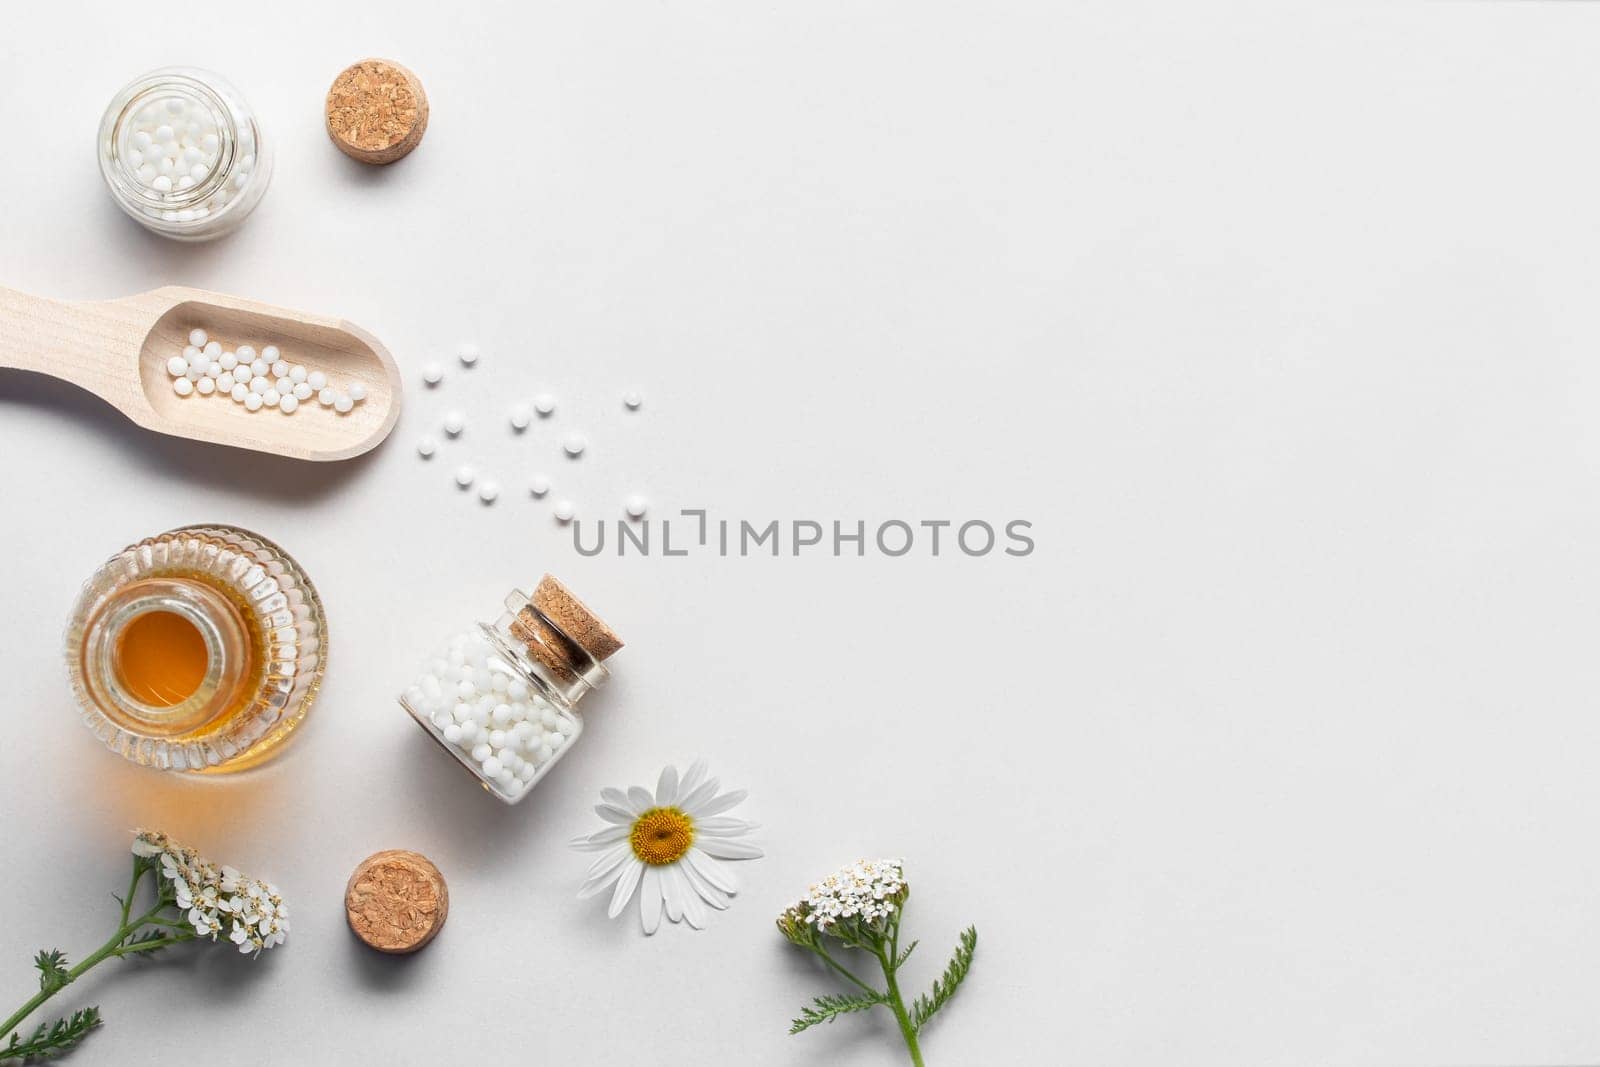 Homeopathic medicines and medicinal plants on a light background, copy space, flatlay by galsand